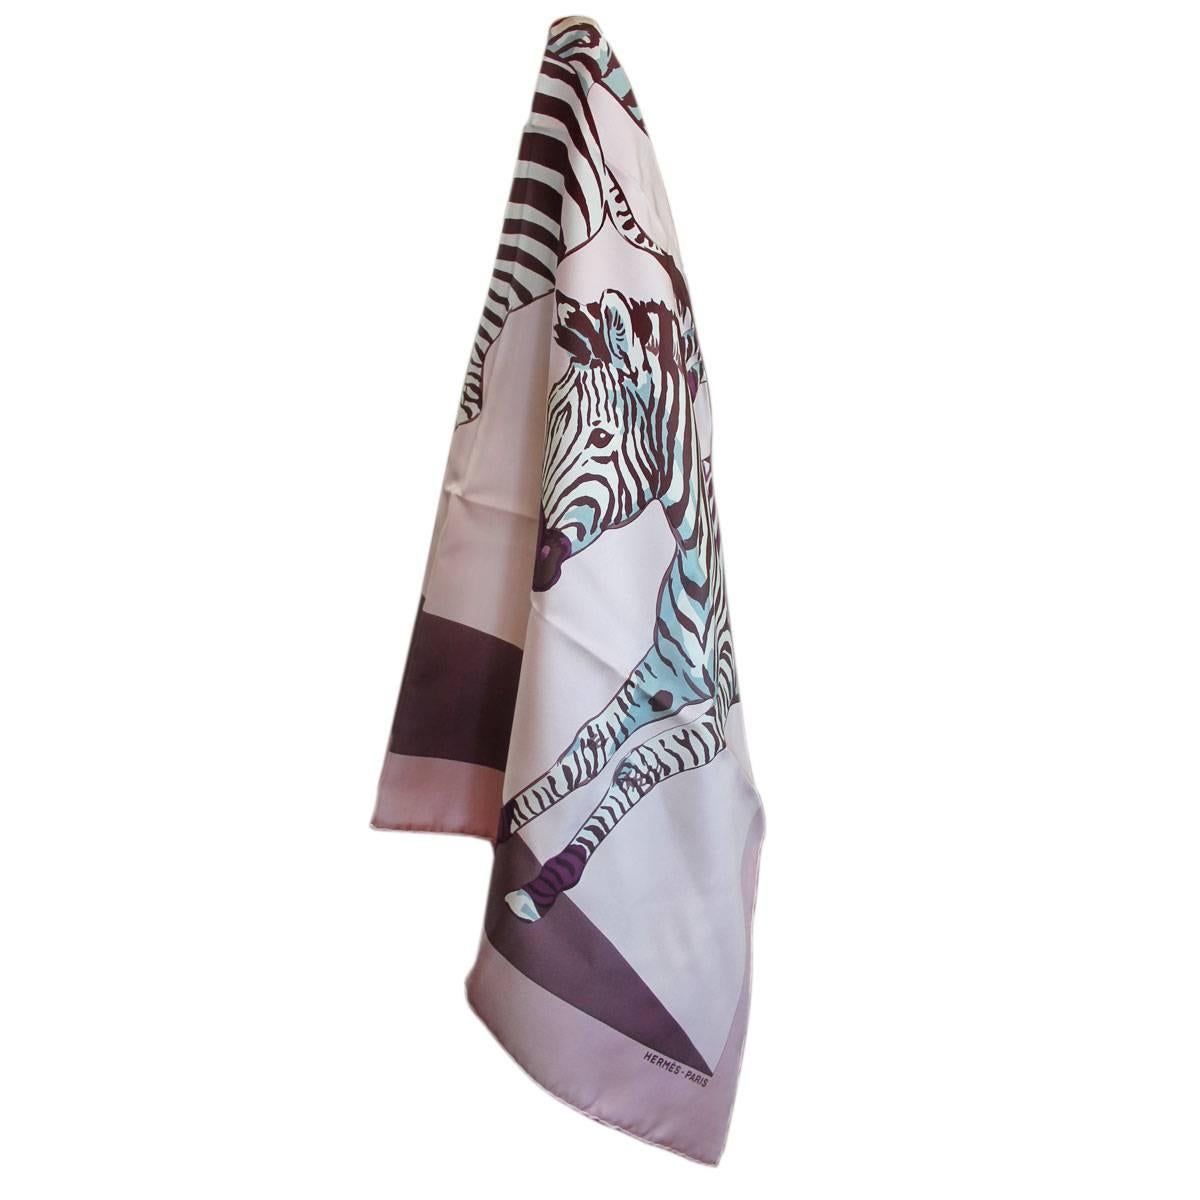 Company: Hermes
Style: Scarf
Dimensions: 36